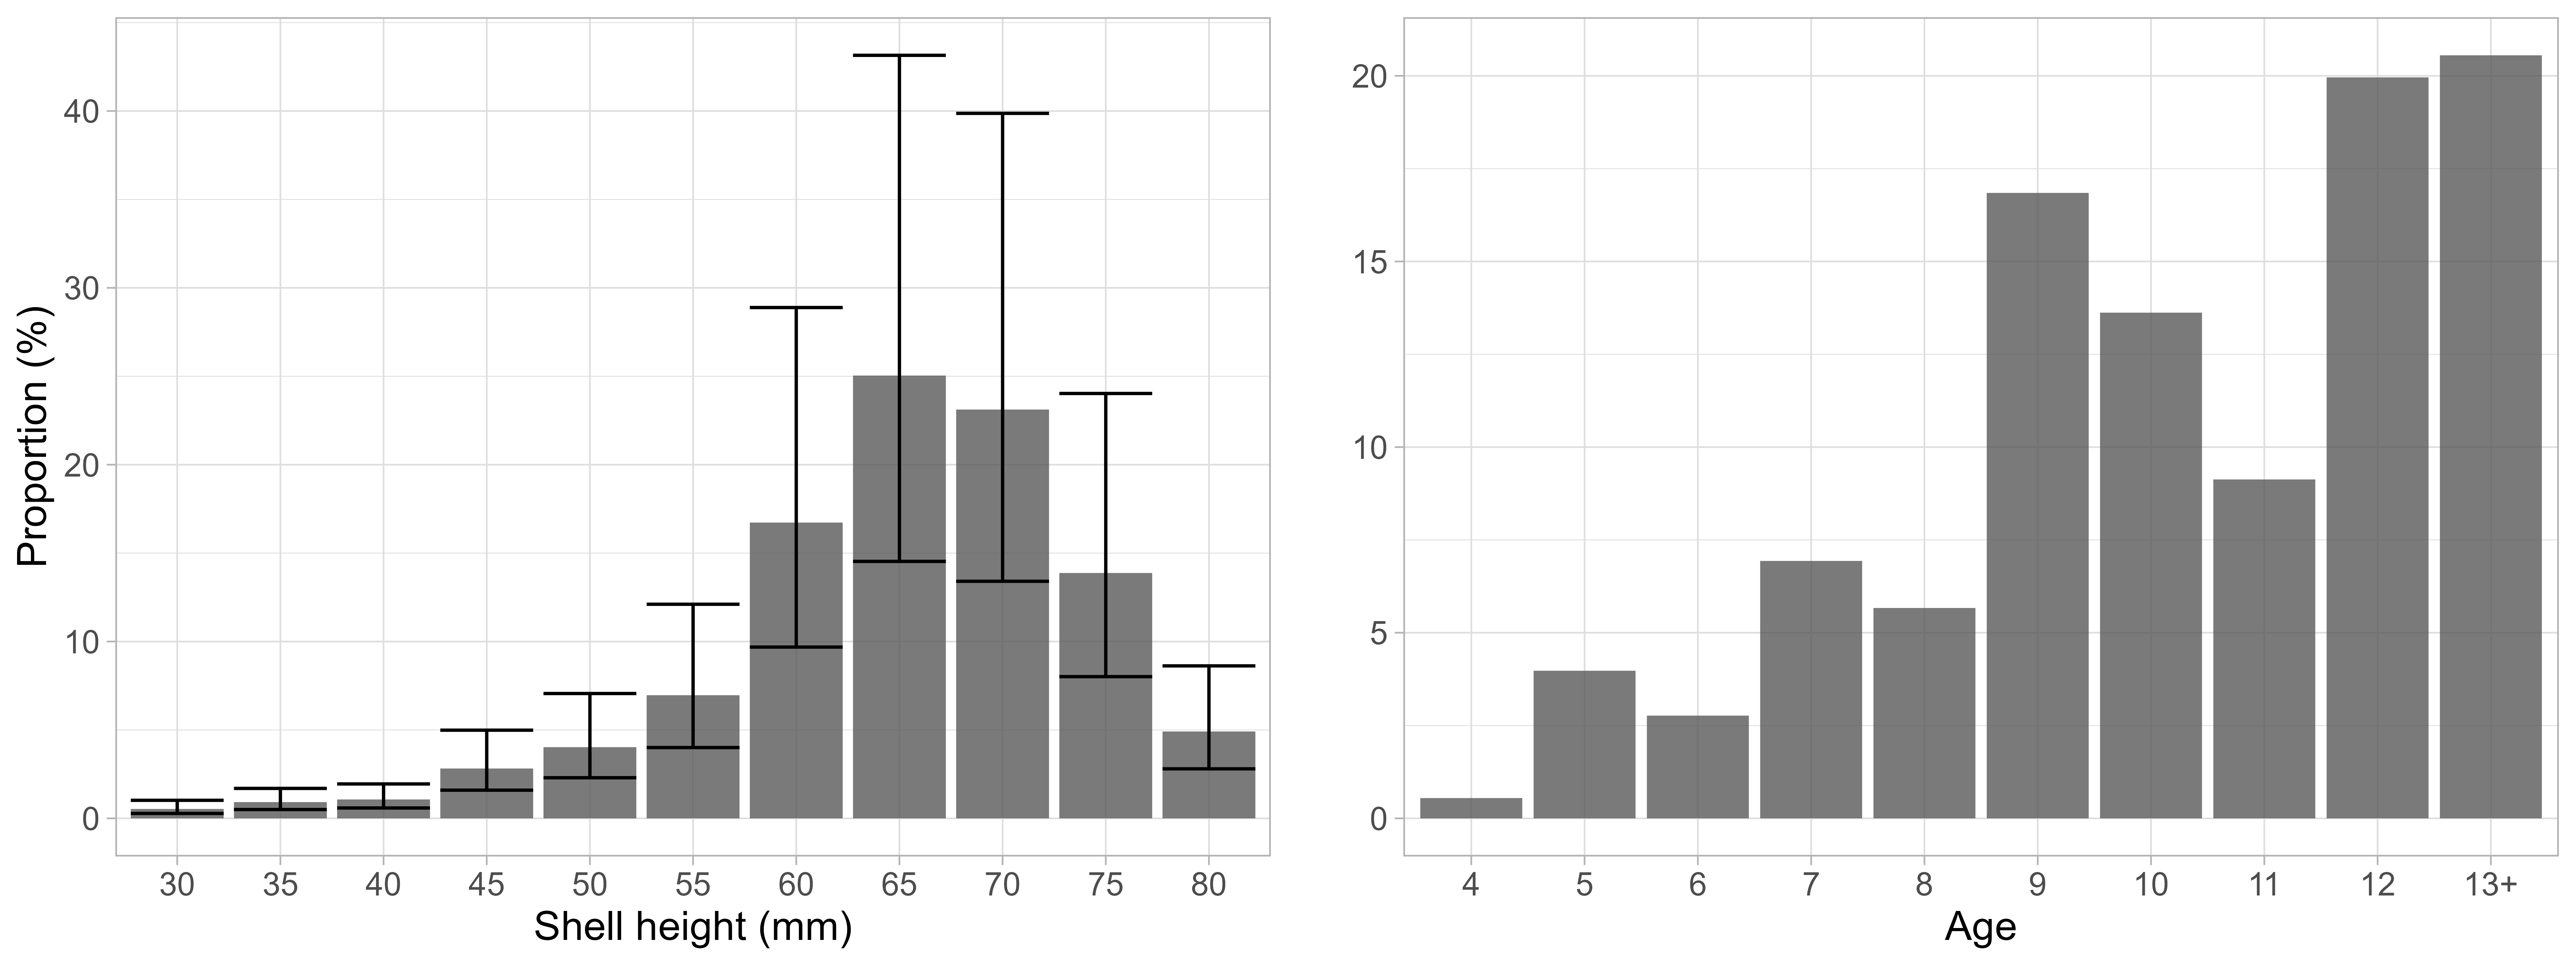 Scallop length and age frequencies estimated using spatial GAMM. Shown are the relative abundances per length group (left) or age class (right) represented by the mean (bars) and their 95% confidence intervals standardized to the total abundance.